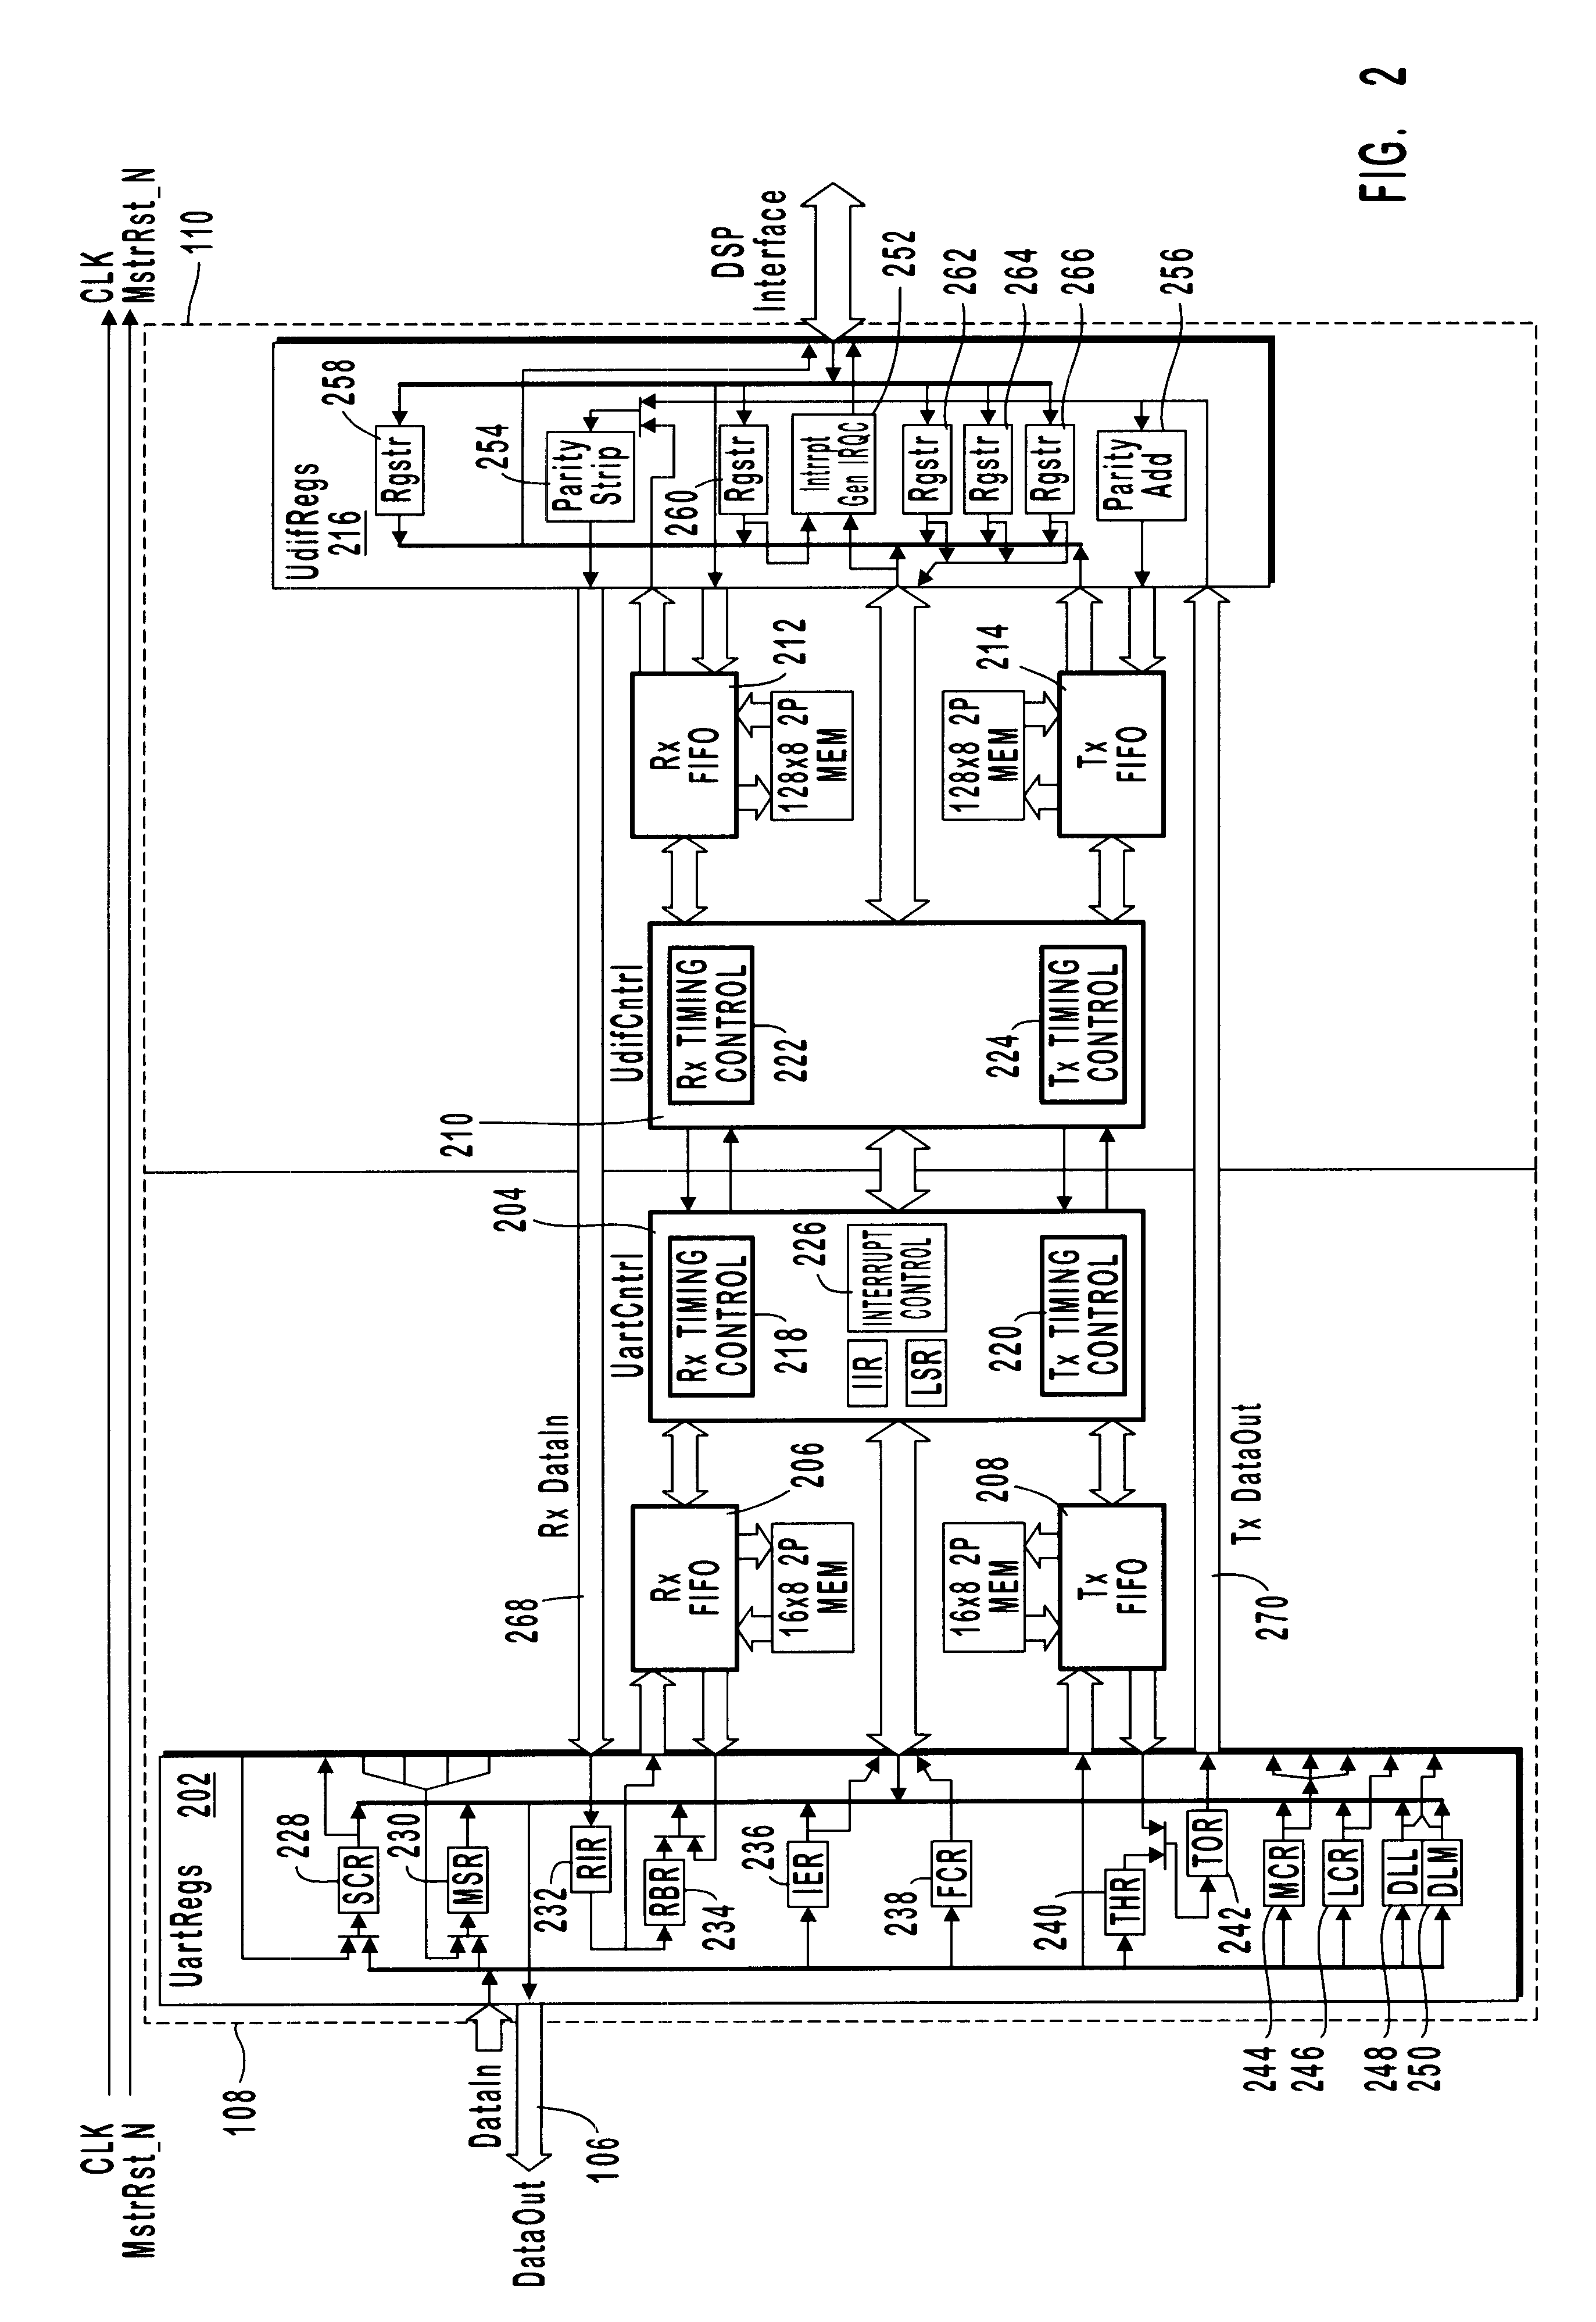 High throughput UART to DSP interface having Dual transmit and receive FIFO buffers to support data transfer between a host computer and an attached modem